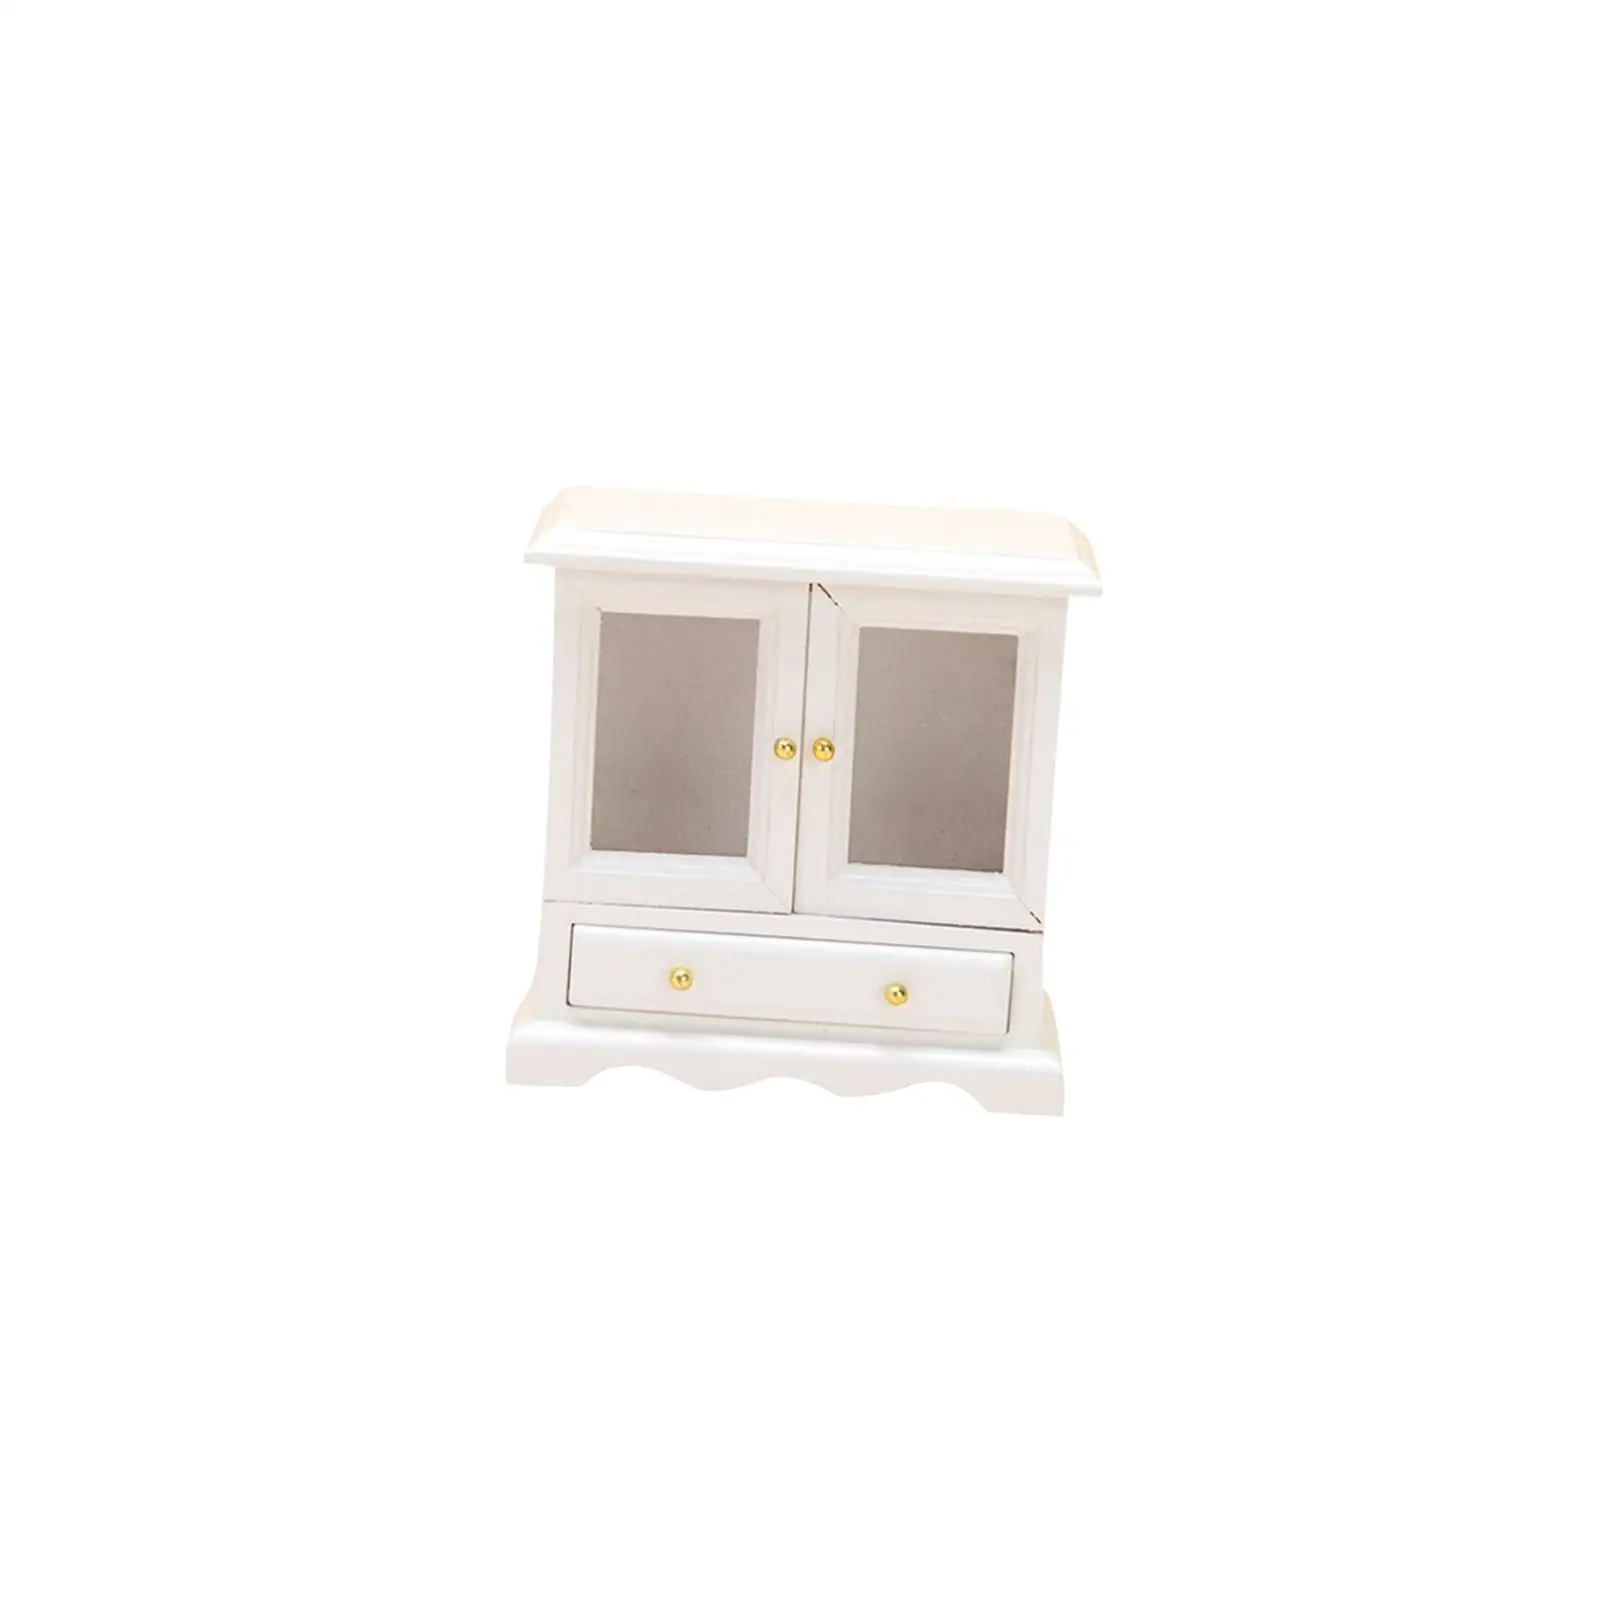 1:12 Scale Doll House Kitchen Sideboard Floor Cabinet Miniature Wooden Model Doll House Accessories for Kitchen Measure 3x3inch